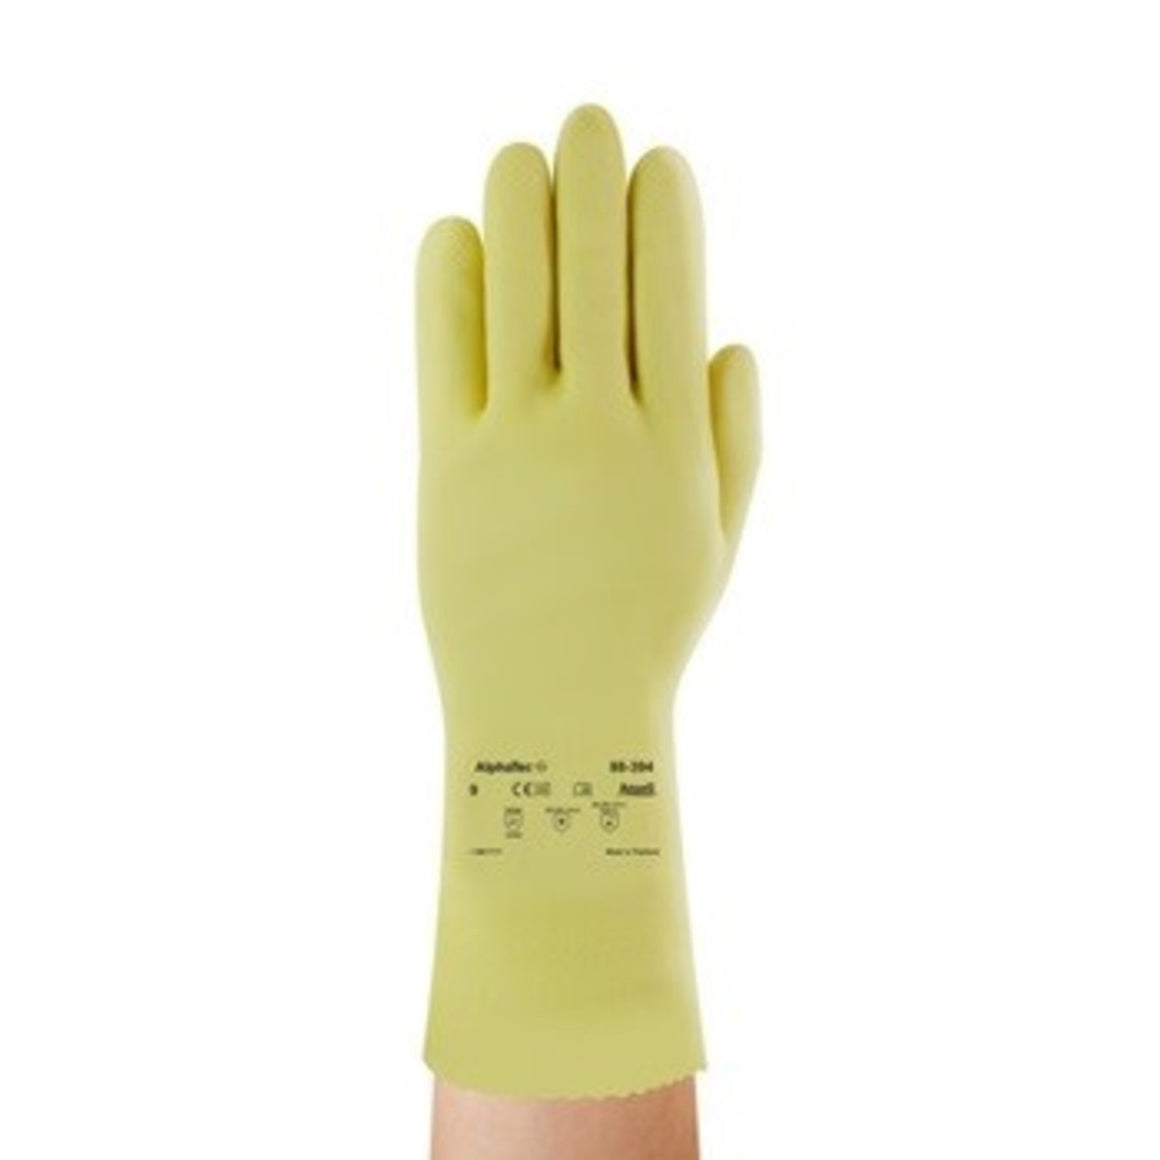 Ansell Canner's & Handler's Gloves,193947,Medium Duty With Fishscale Grip,20 Mil,12",Size 10